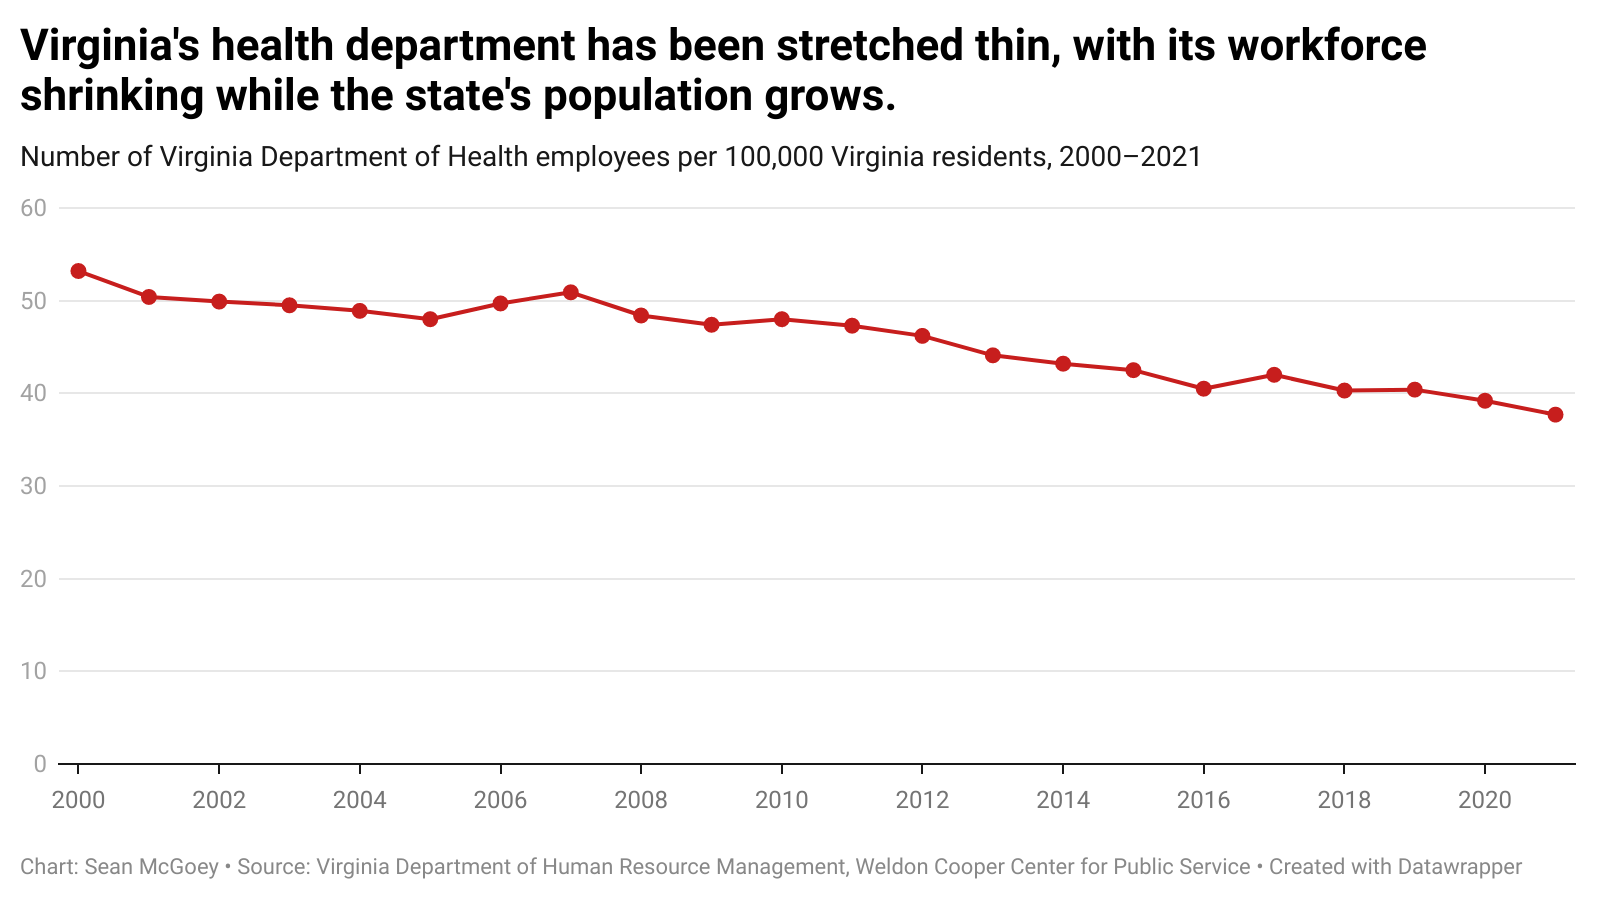 Virginia's health department has been stretched thin, with its workforce shrinking while the state's population grows.